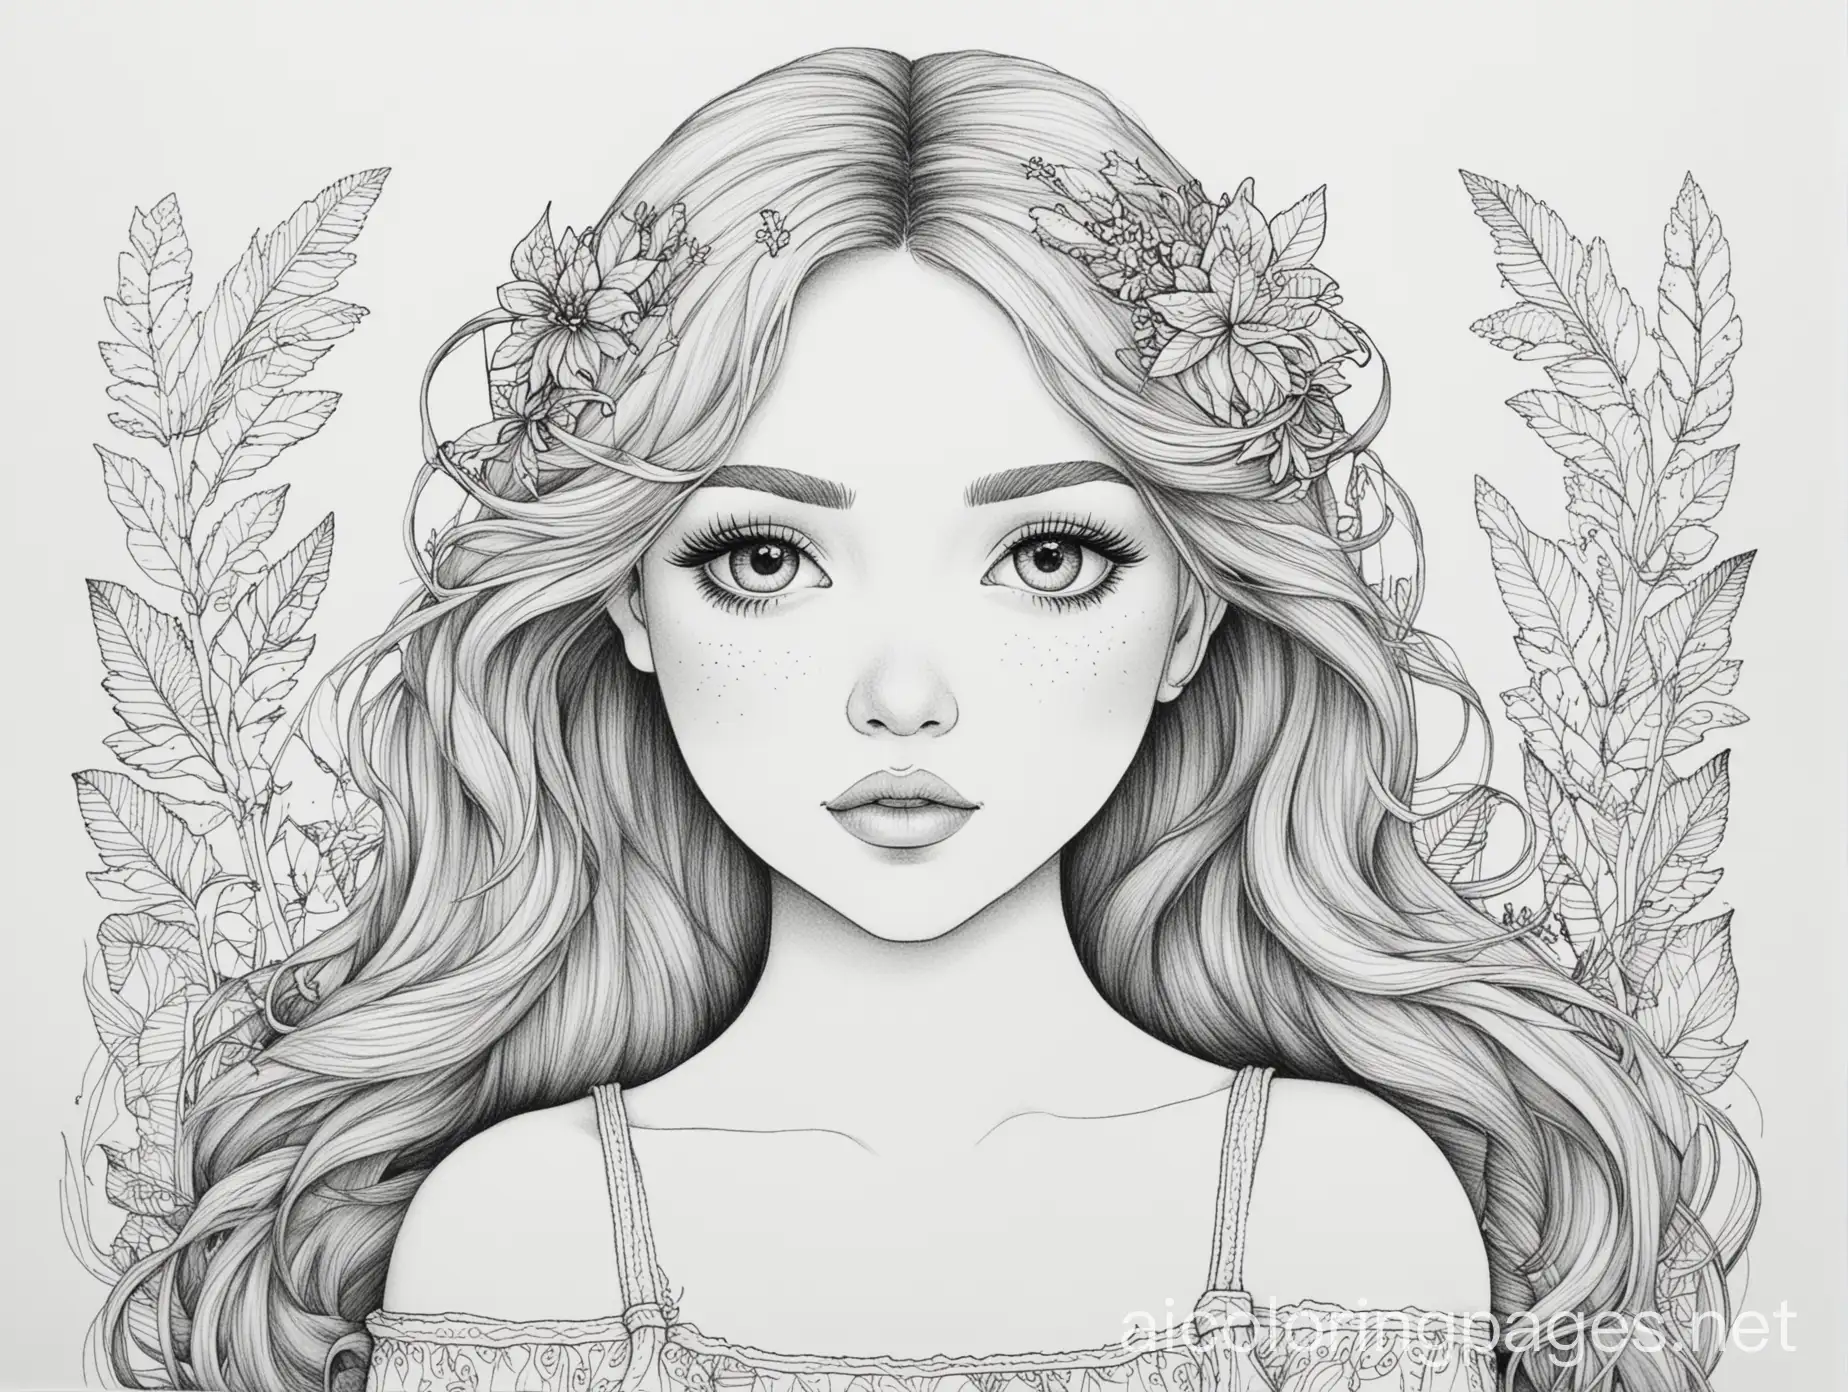 Brianna bunting, Coloring Page, black and white, line art, white background, Simplicity, Ample White Space